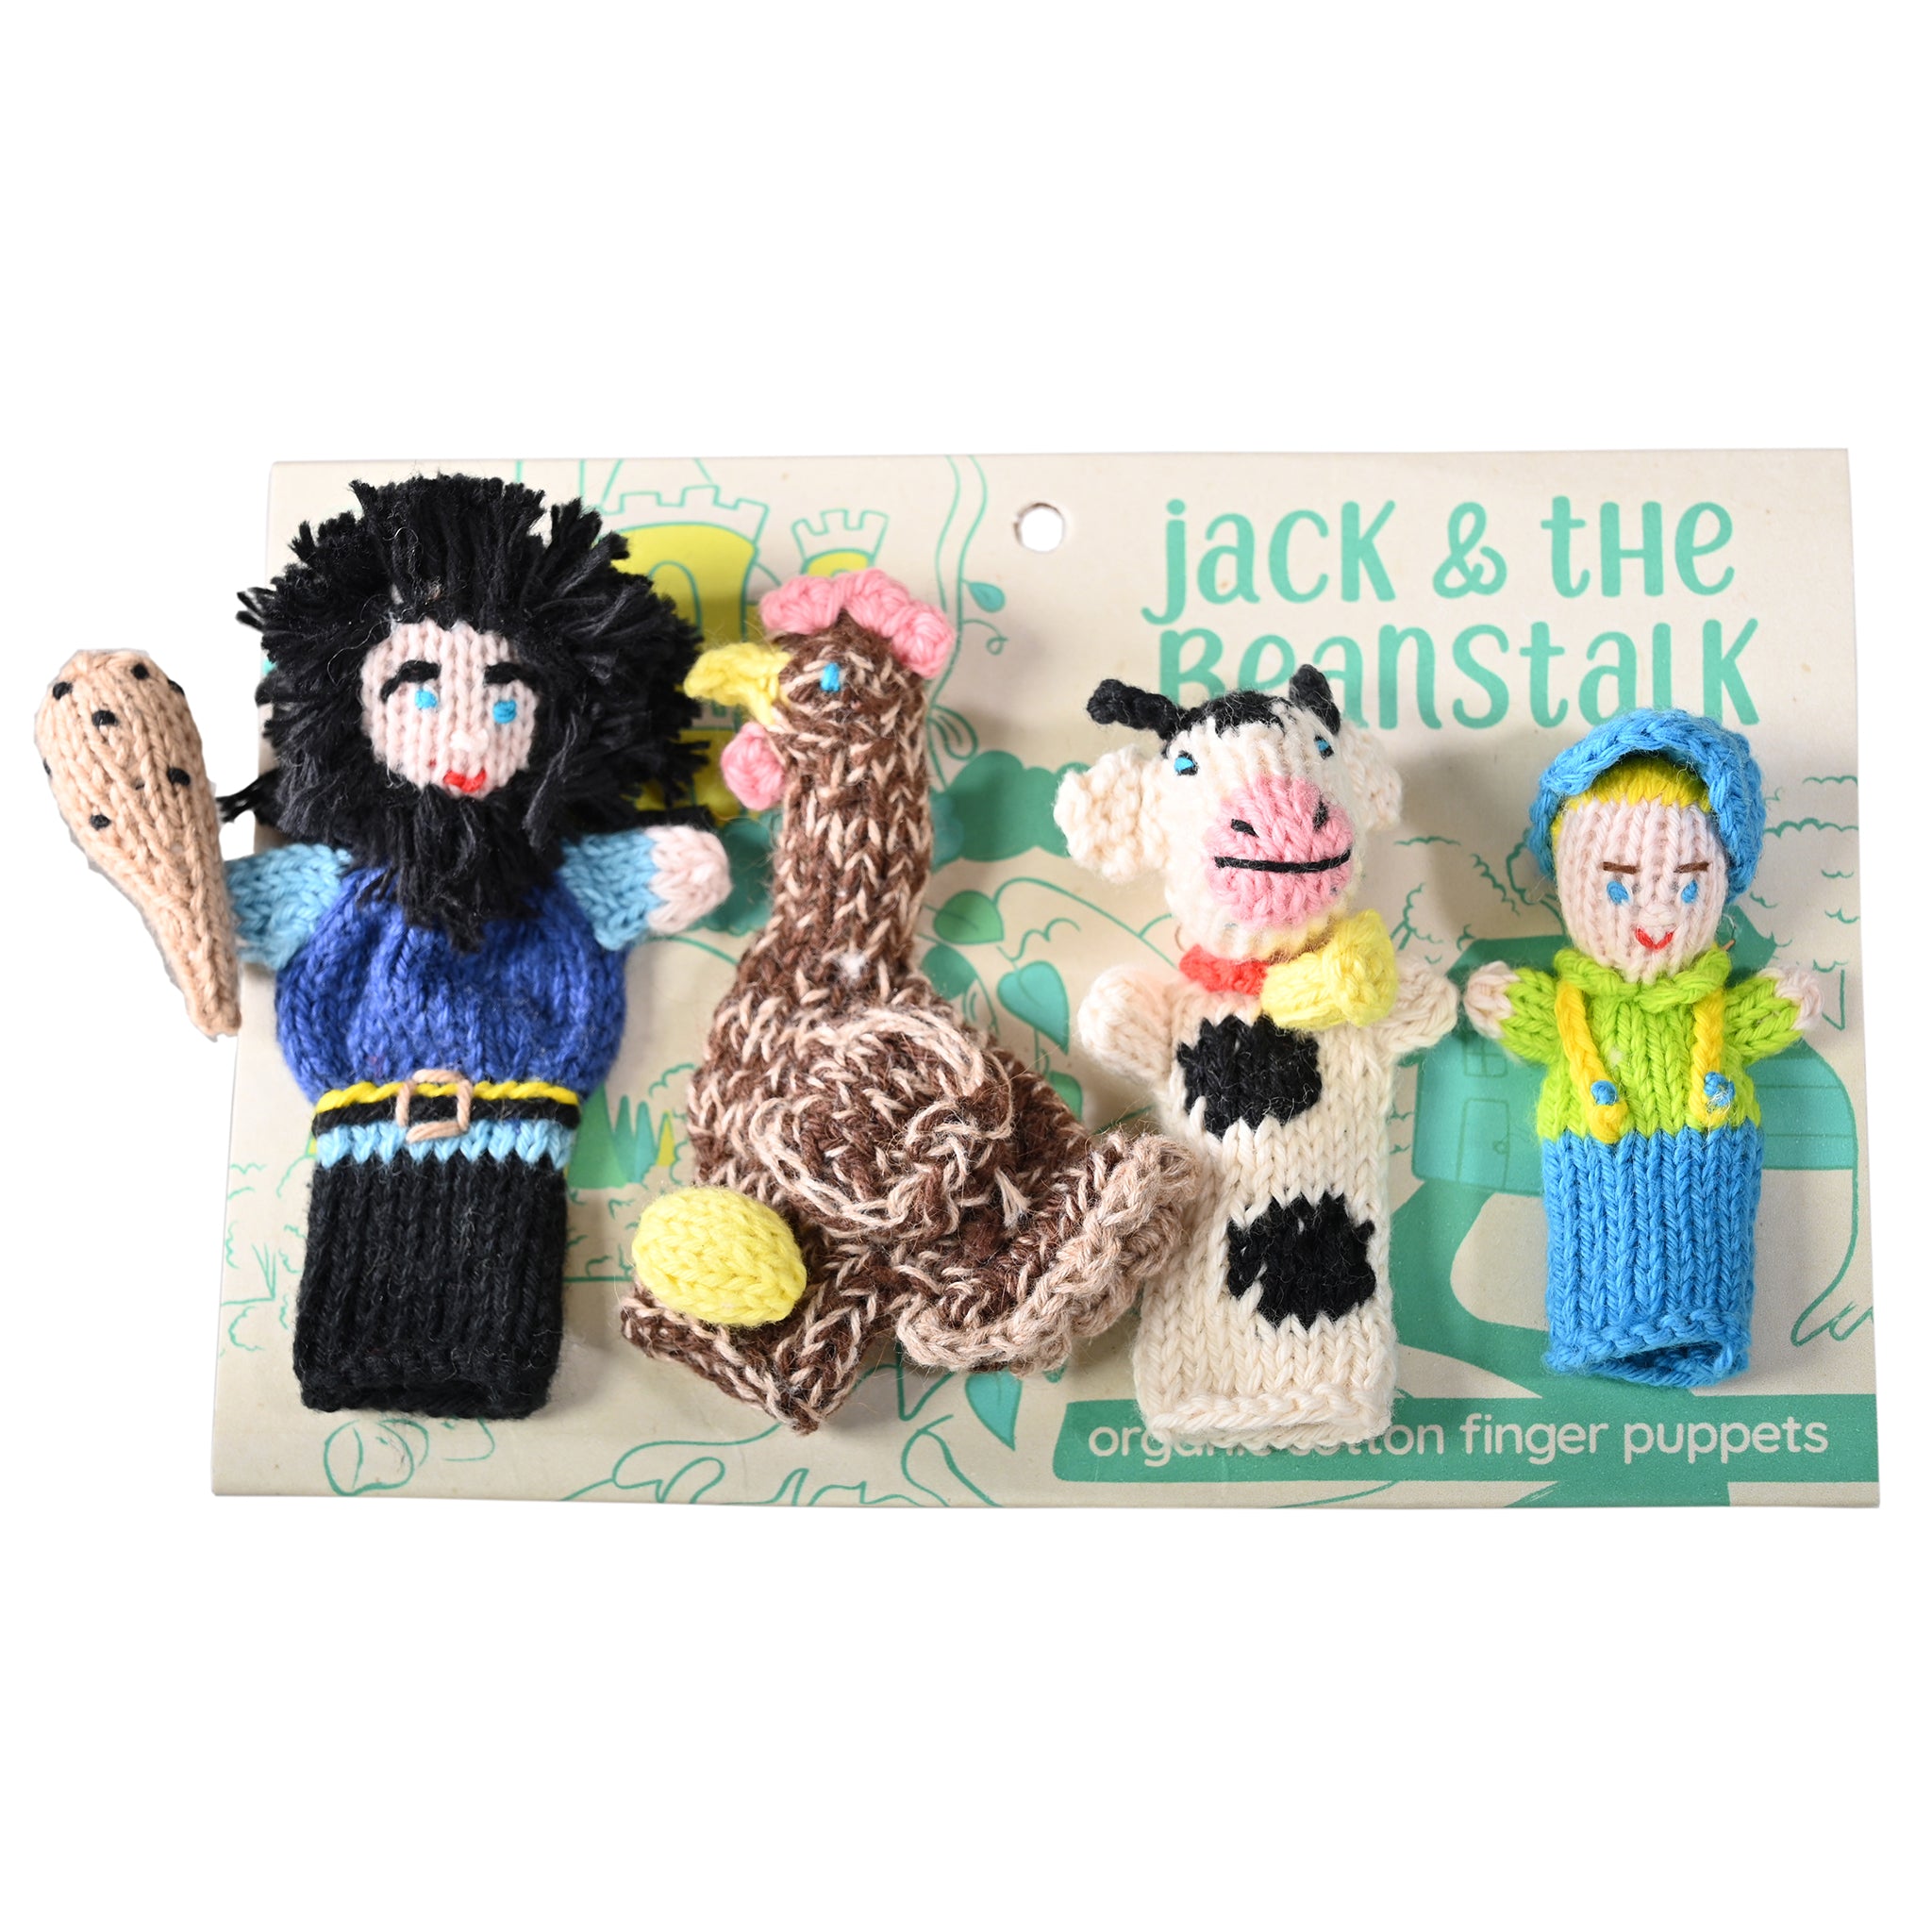 Jack & The Bean Stalk Story Pack of 4 - Organic Cotton Finger Puppets